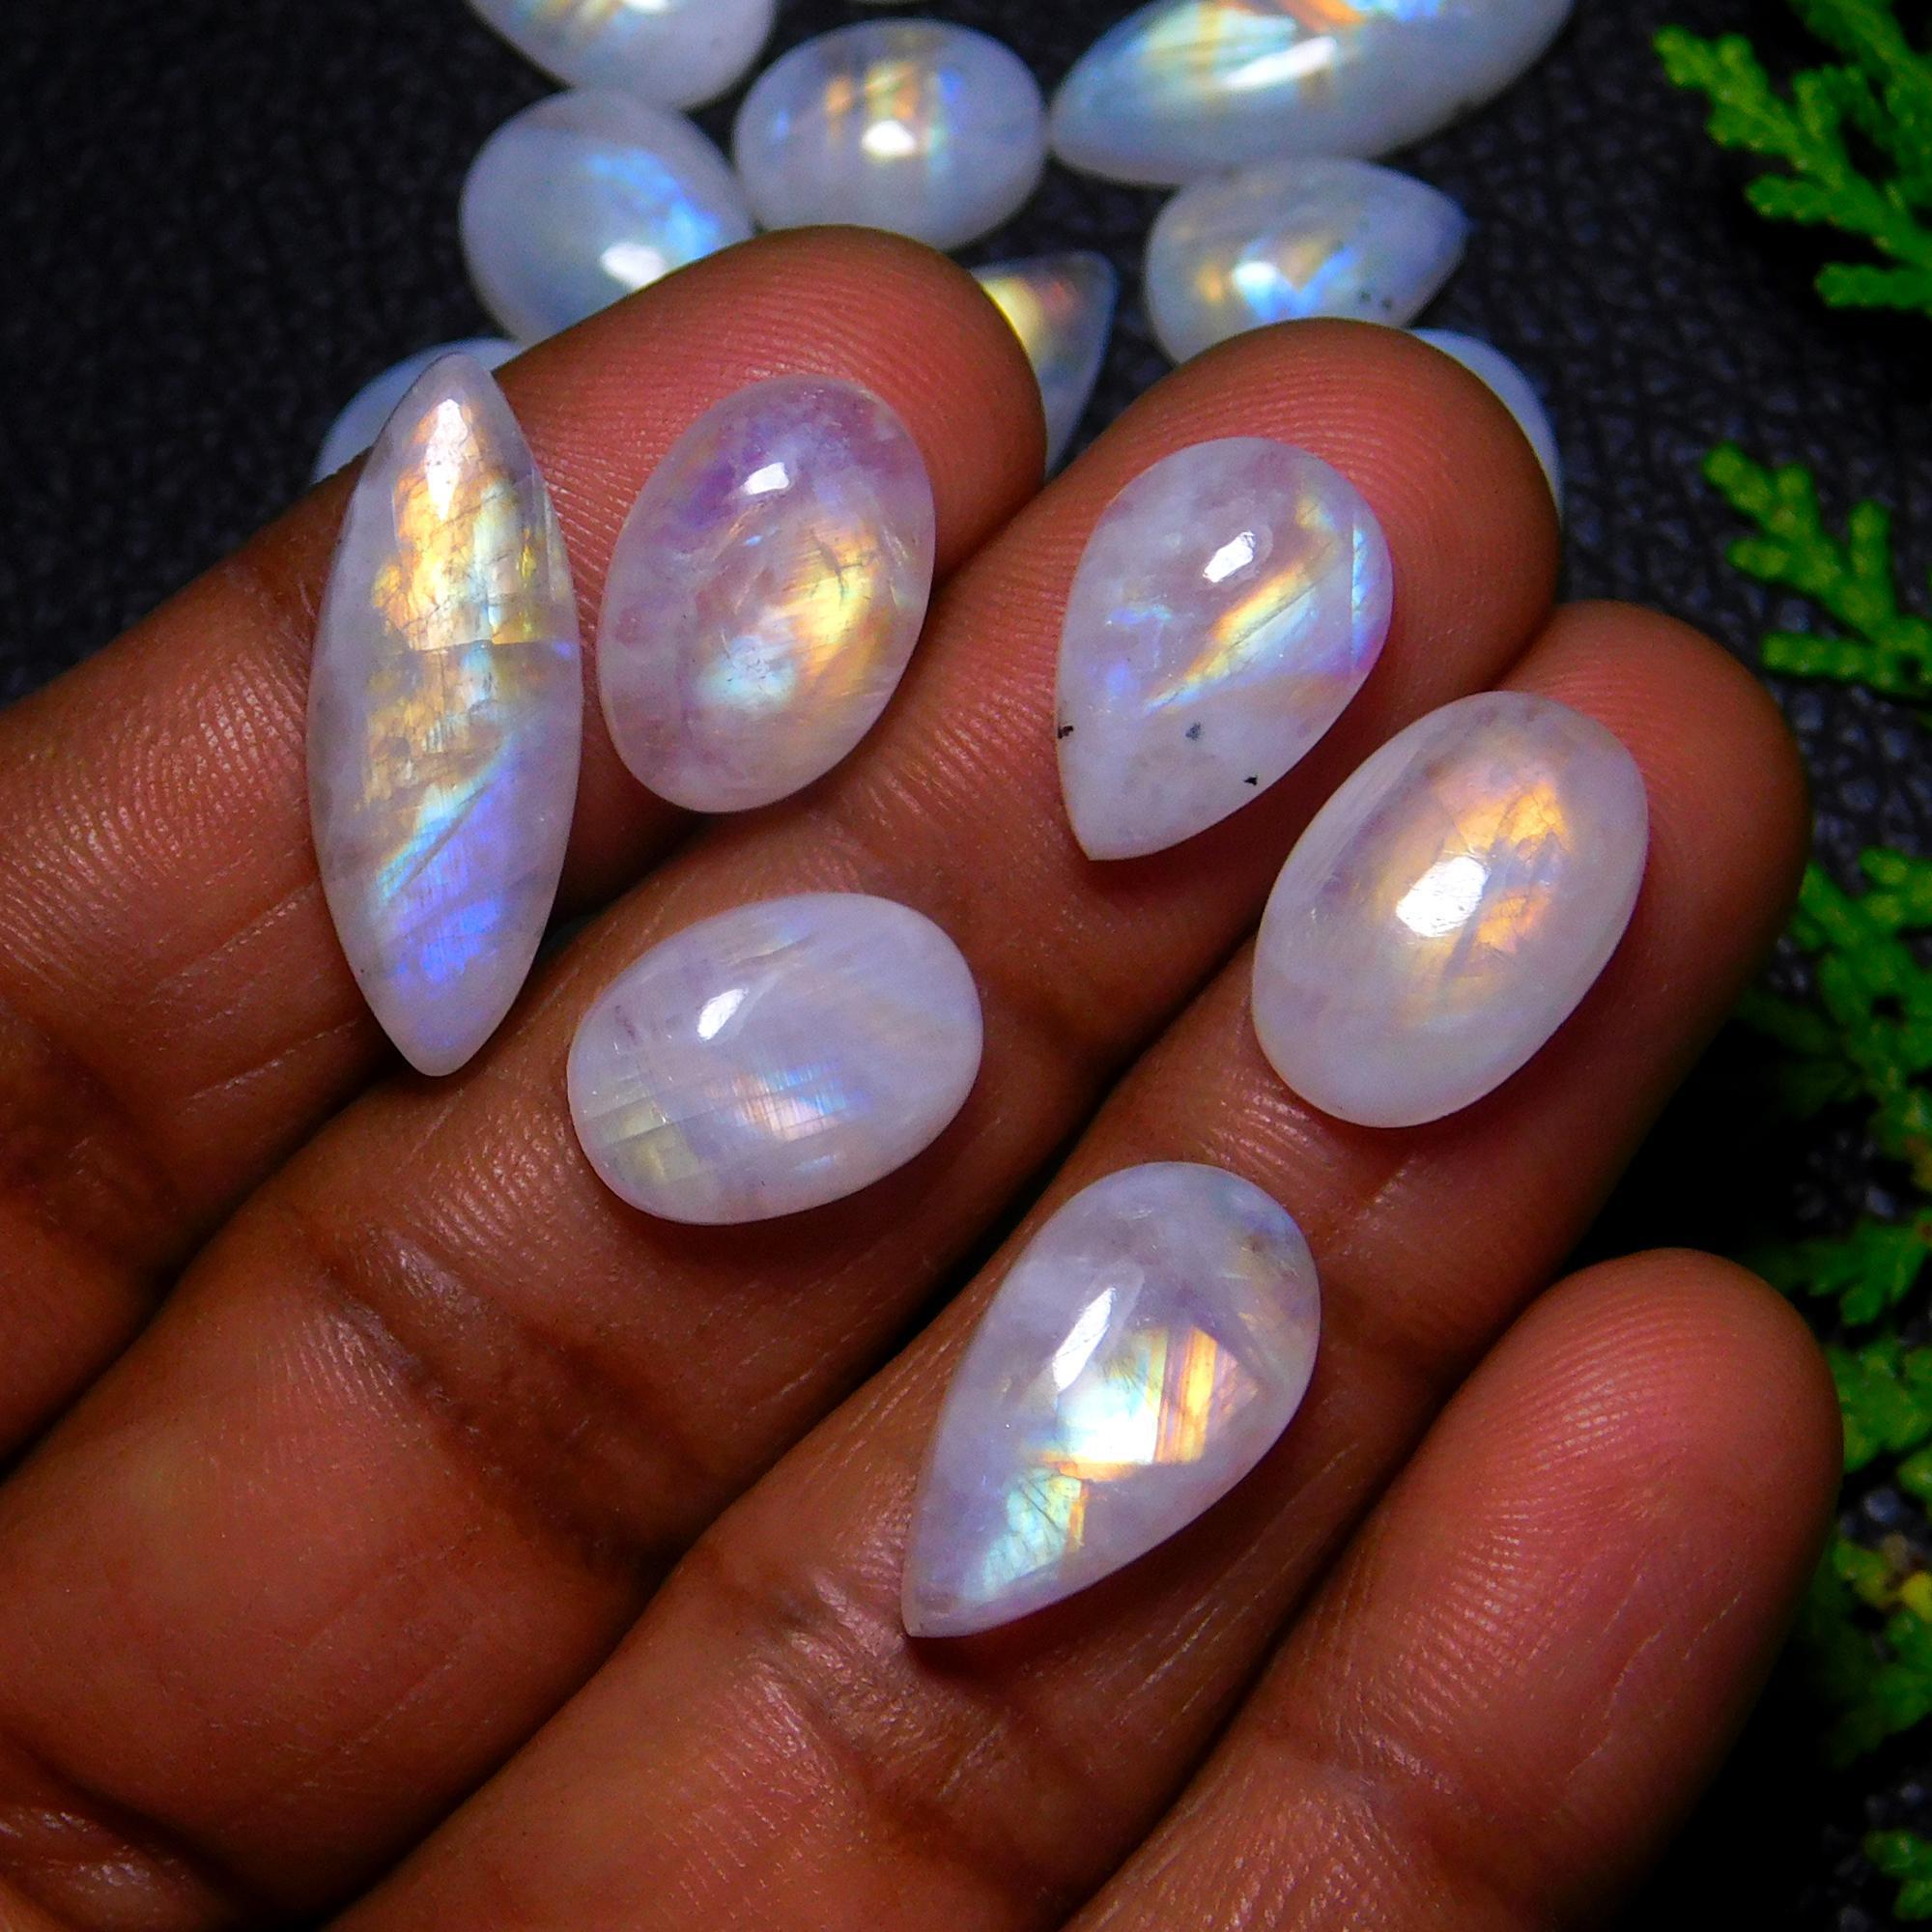 31Pcs 155Cts Natural Rainbow Moonstone Cabochon Blue Fire Loose Gemstone Crystal jewelry supplies wholesale lot gift for her Black Friday 20X10 7X7mm#9396